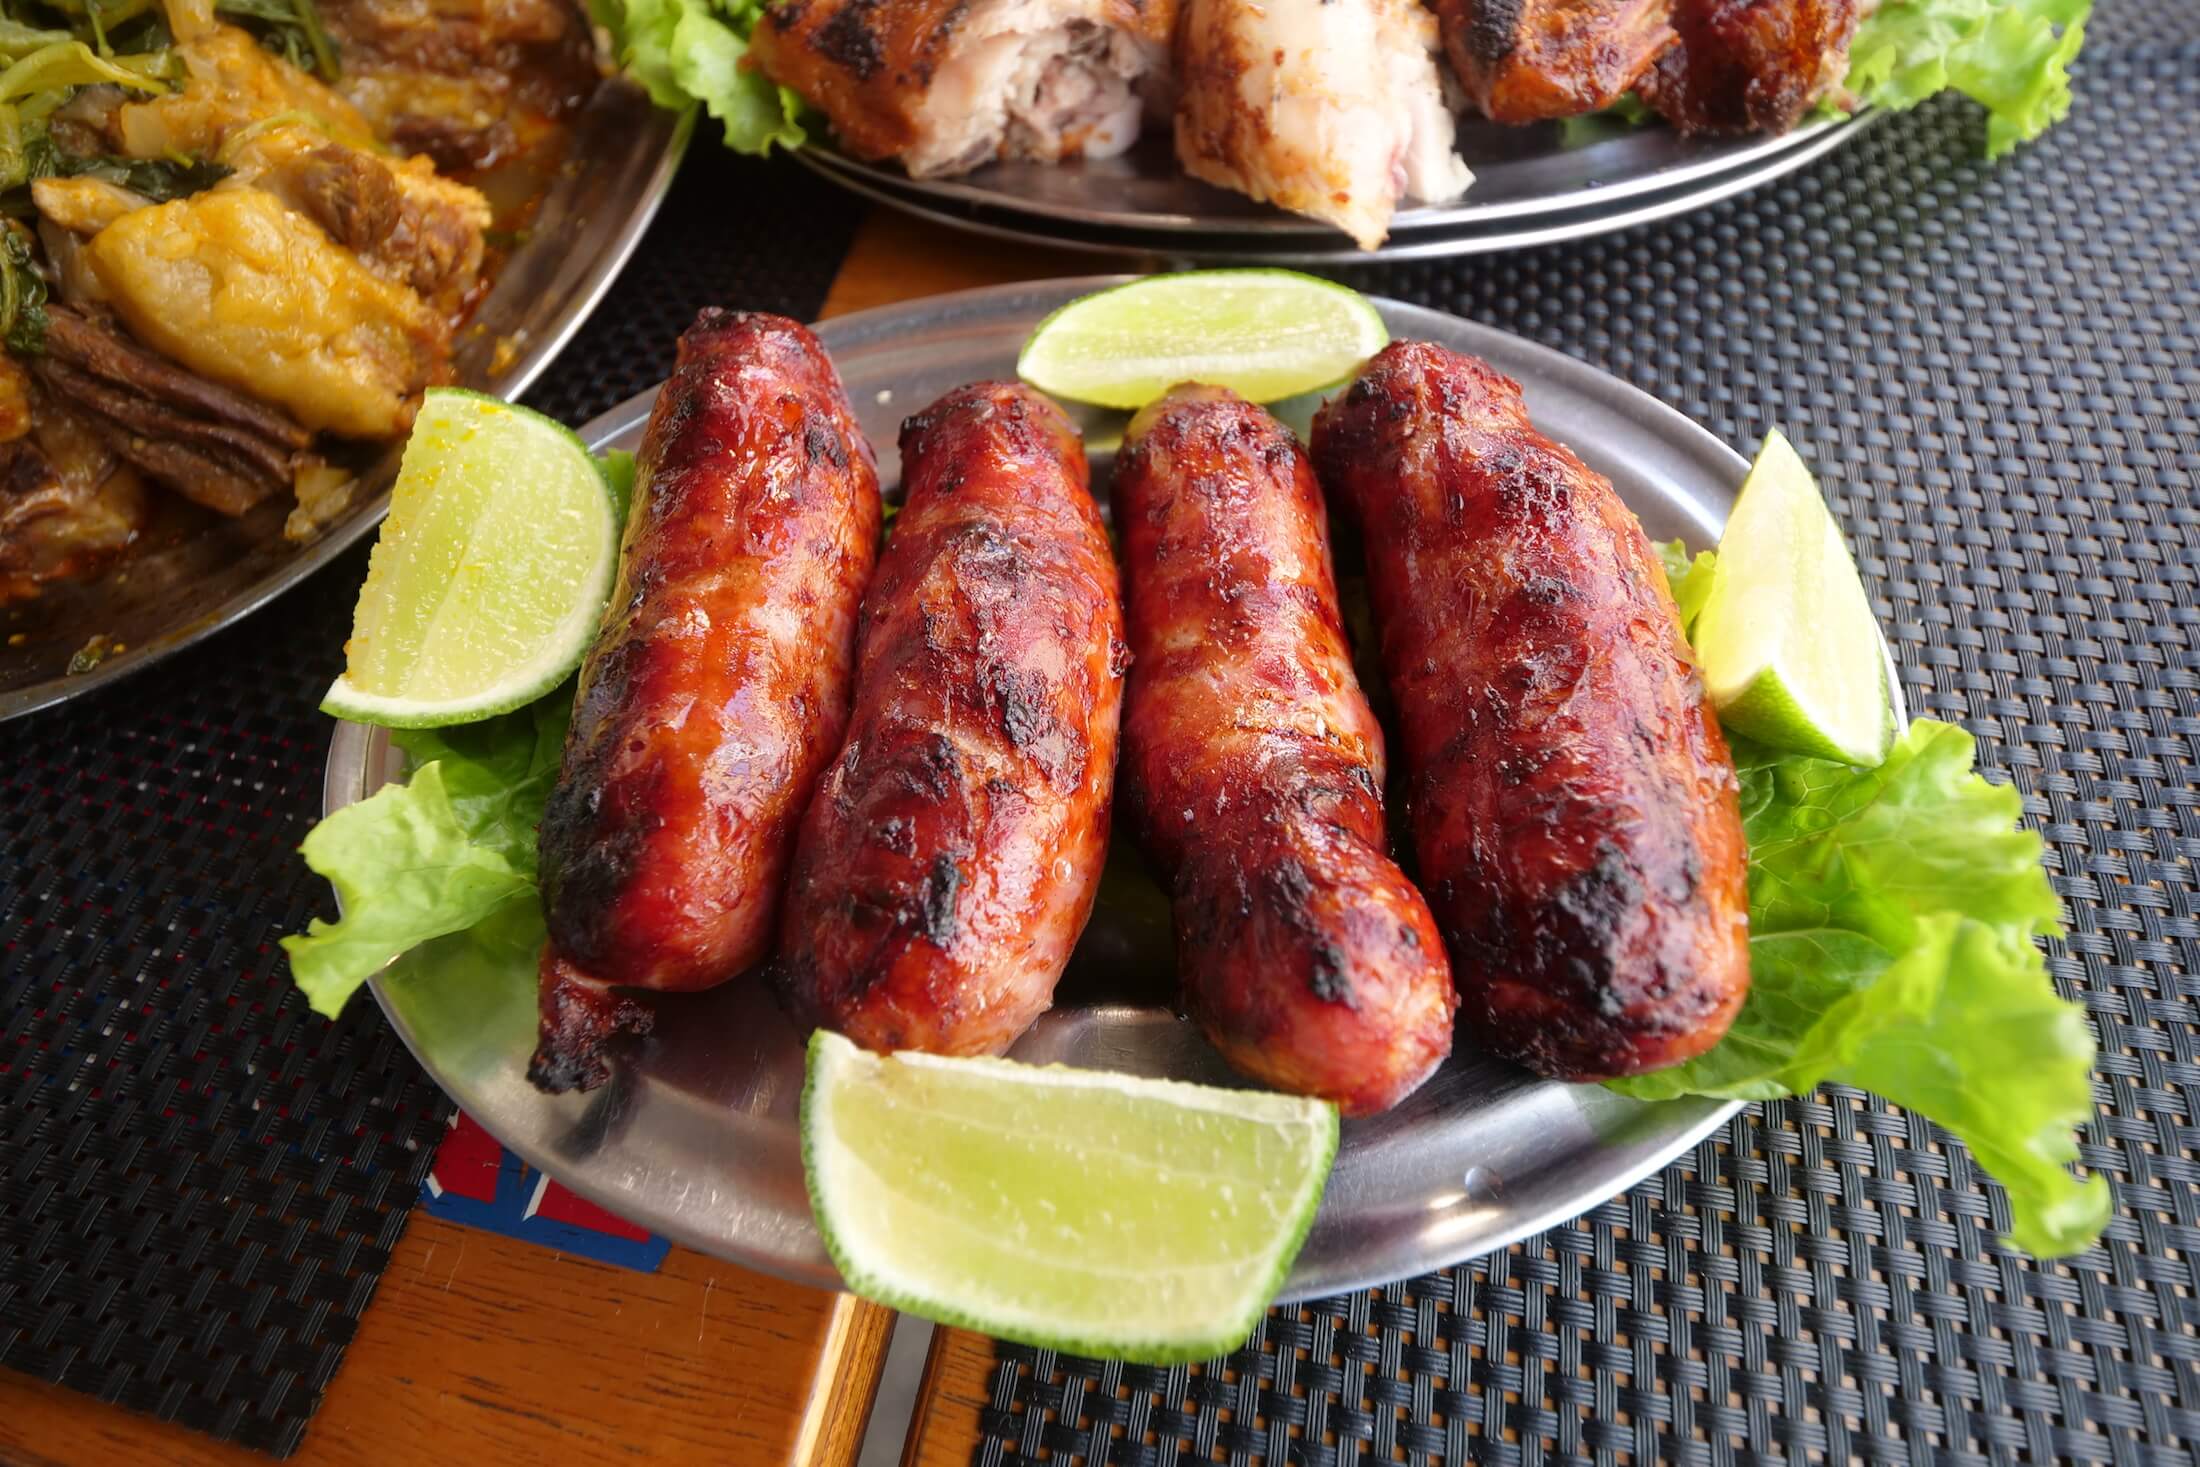 These sausage are a great way to start any meal in Rio de Janeiro